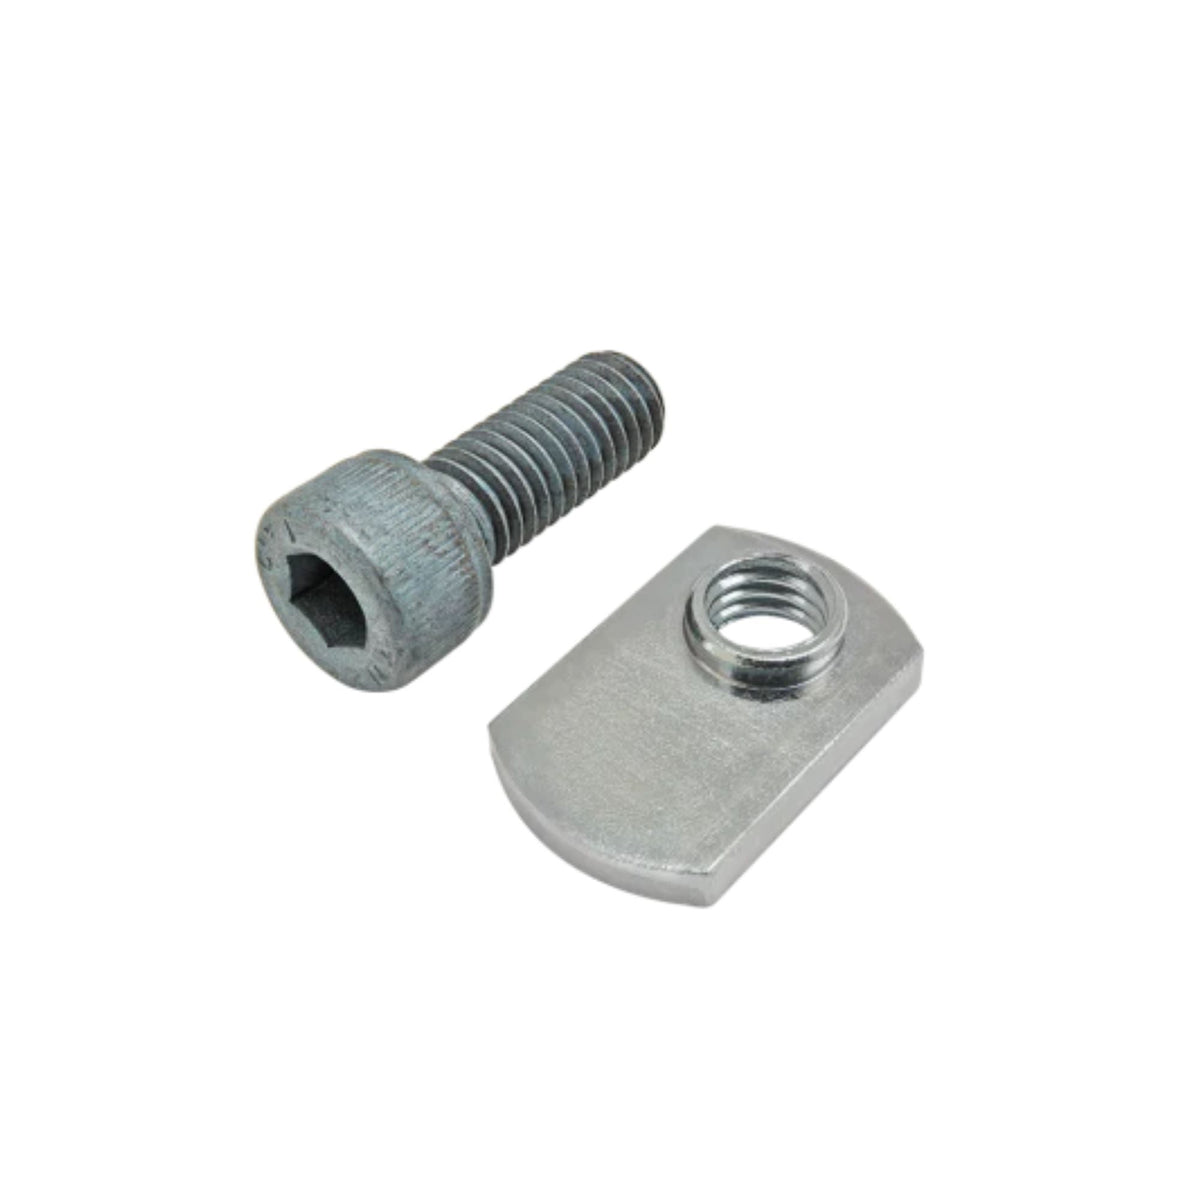 metal screw on the left and a rectangular t-nut on the right with a threaded hole at one end